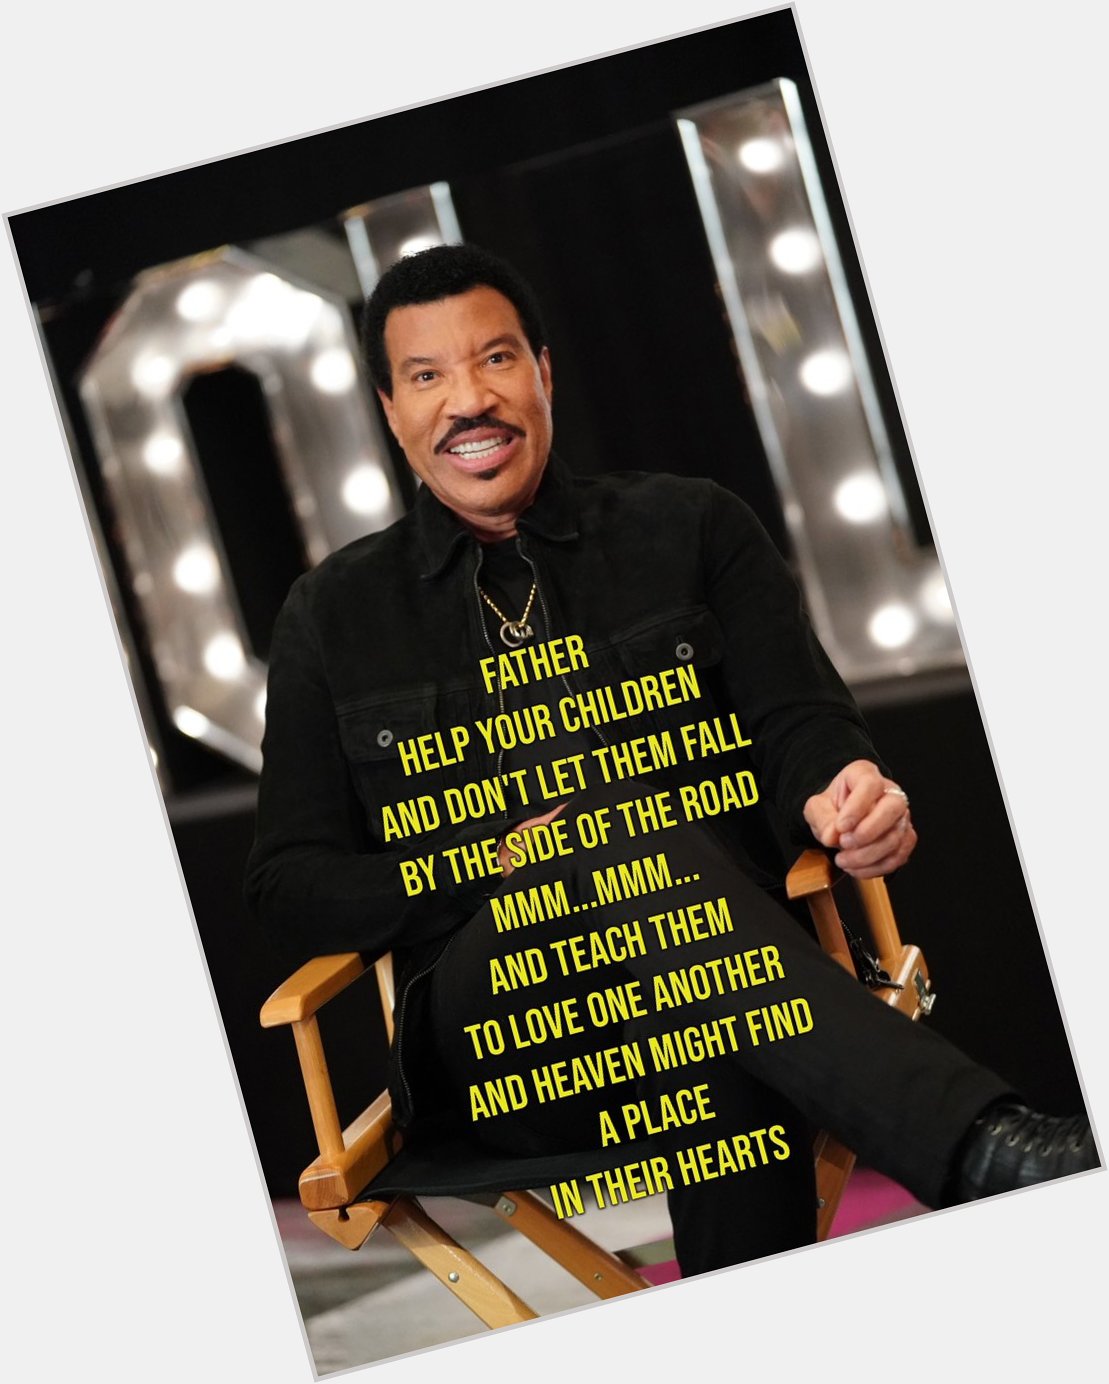  Jesus is Love by The Commodores. Happy Birthday to the one and only Lionel Richie! 